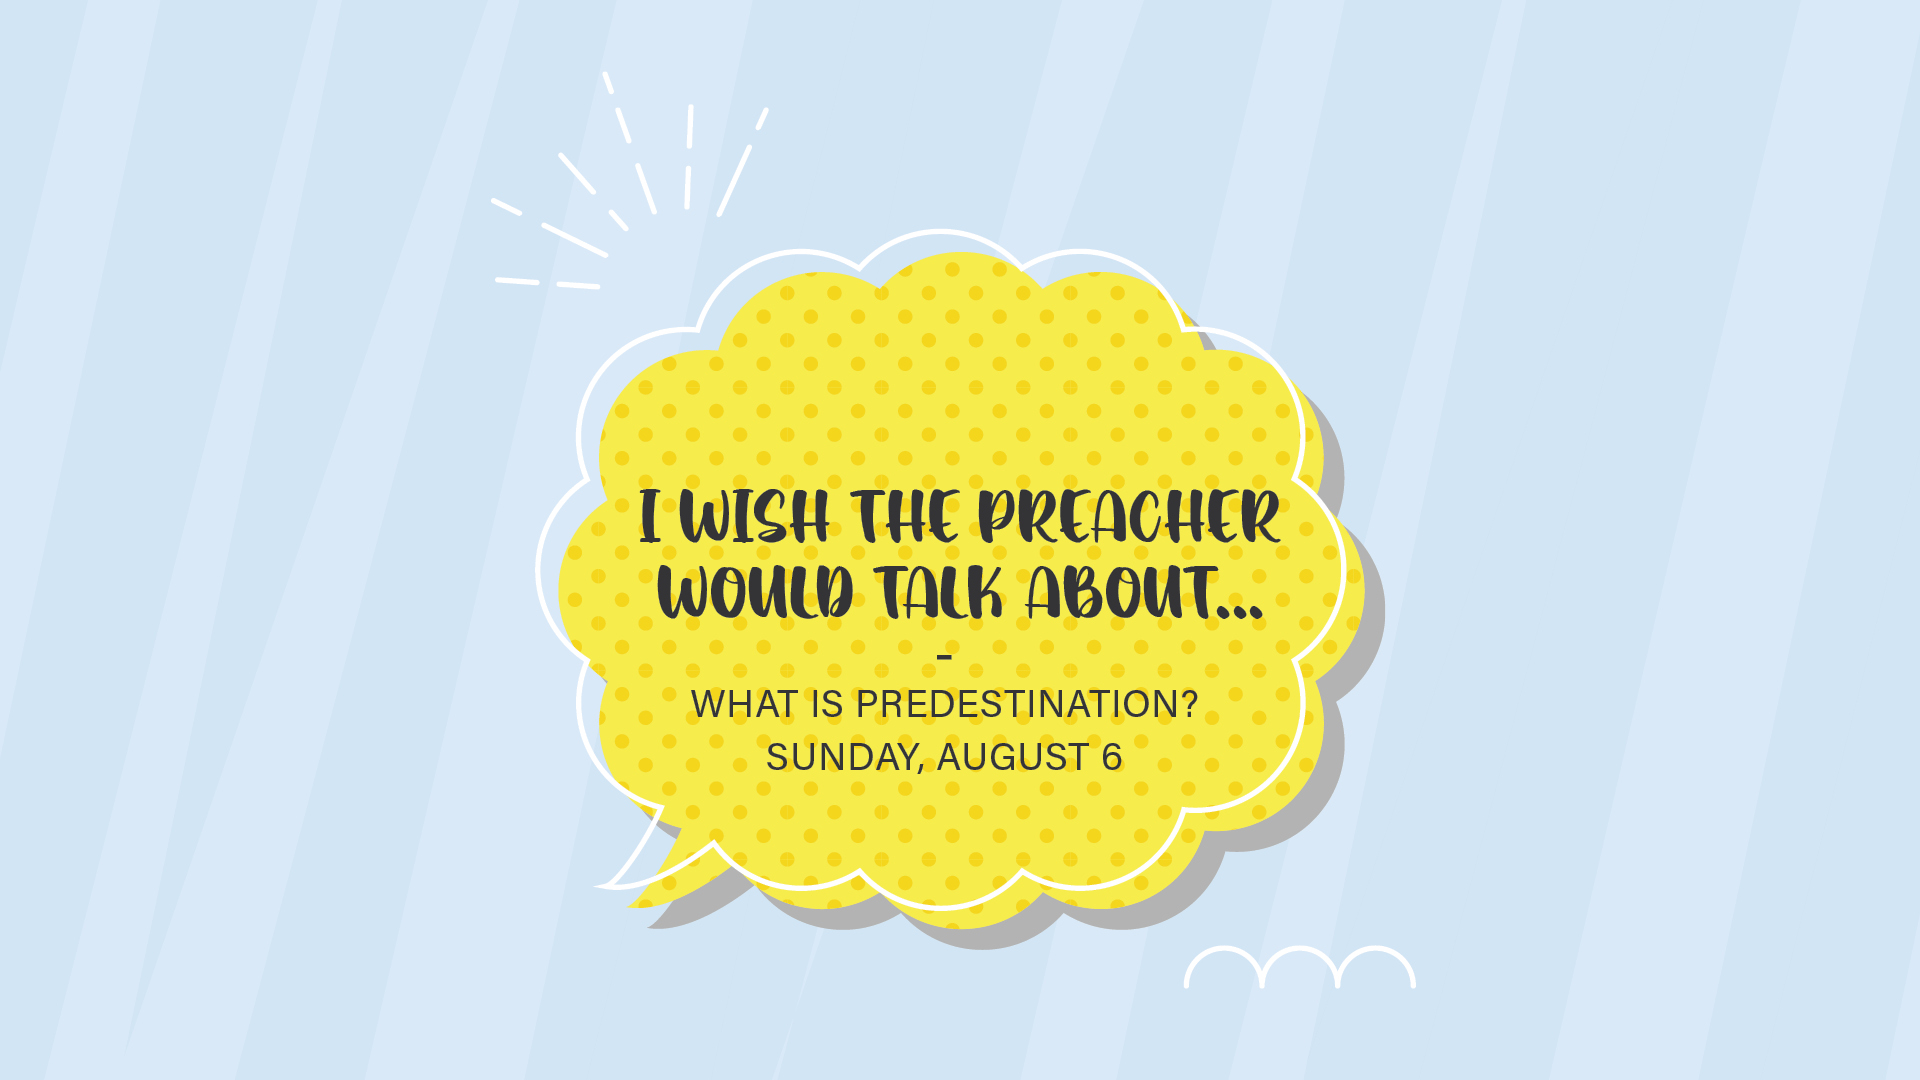 I Wish the Preacher Would Talk About: What is Predestination?